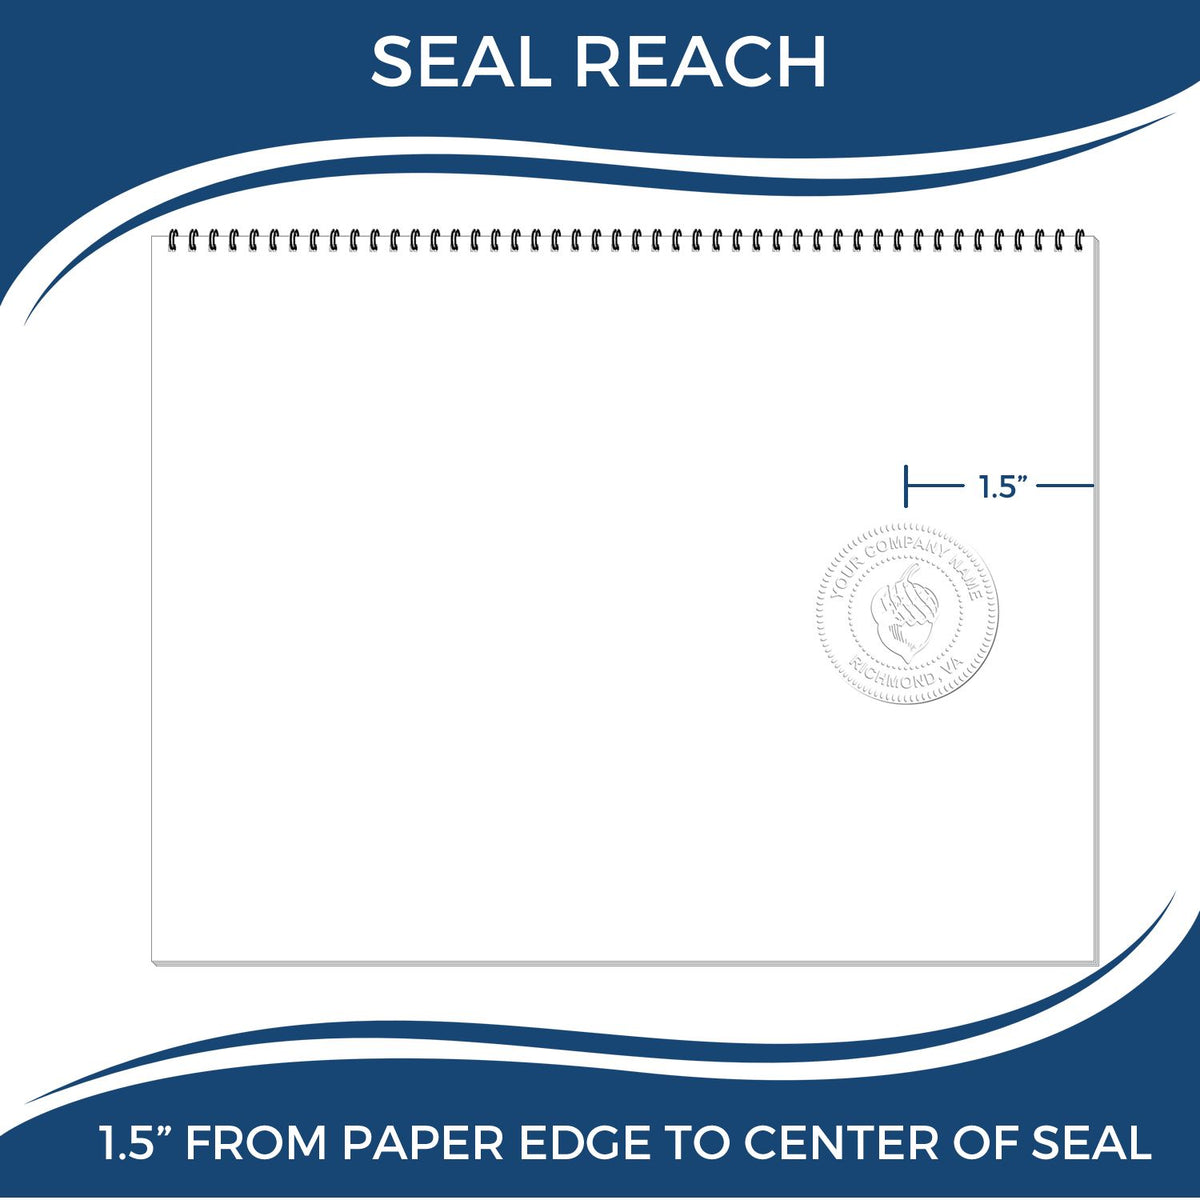 An infographic showing the seal reach which is represented by a ruler and a miniature seal image of the State of Indiana Architectural Seal Embosser